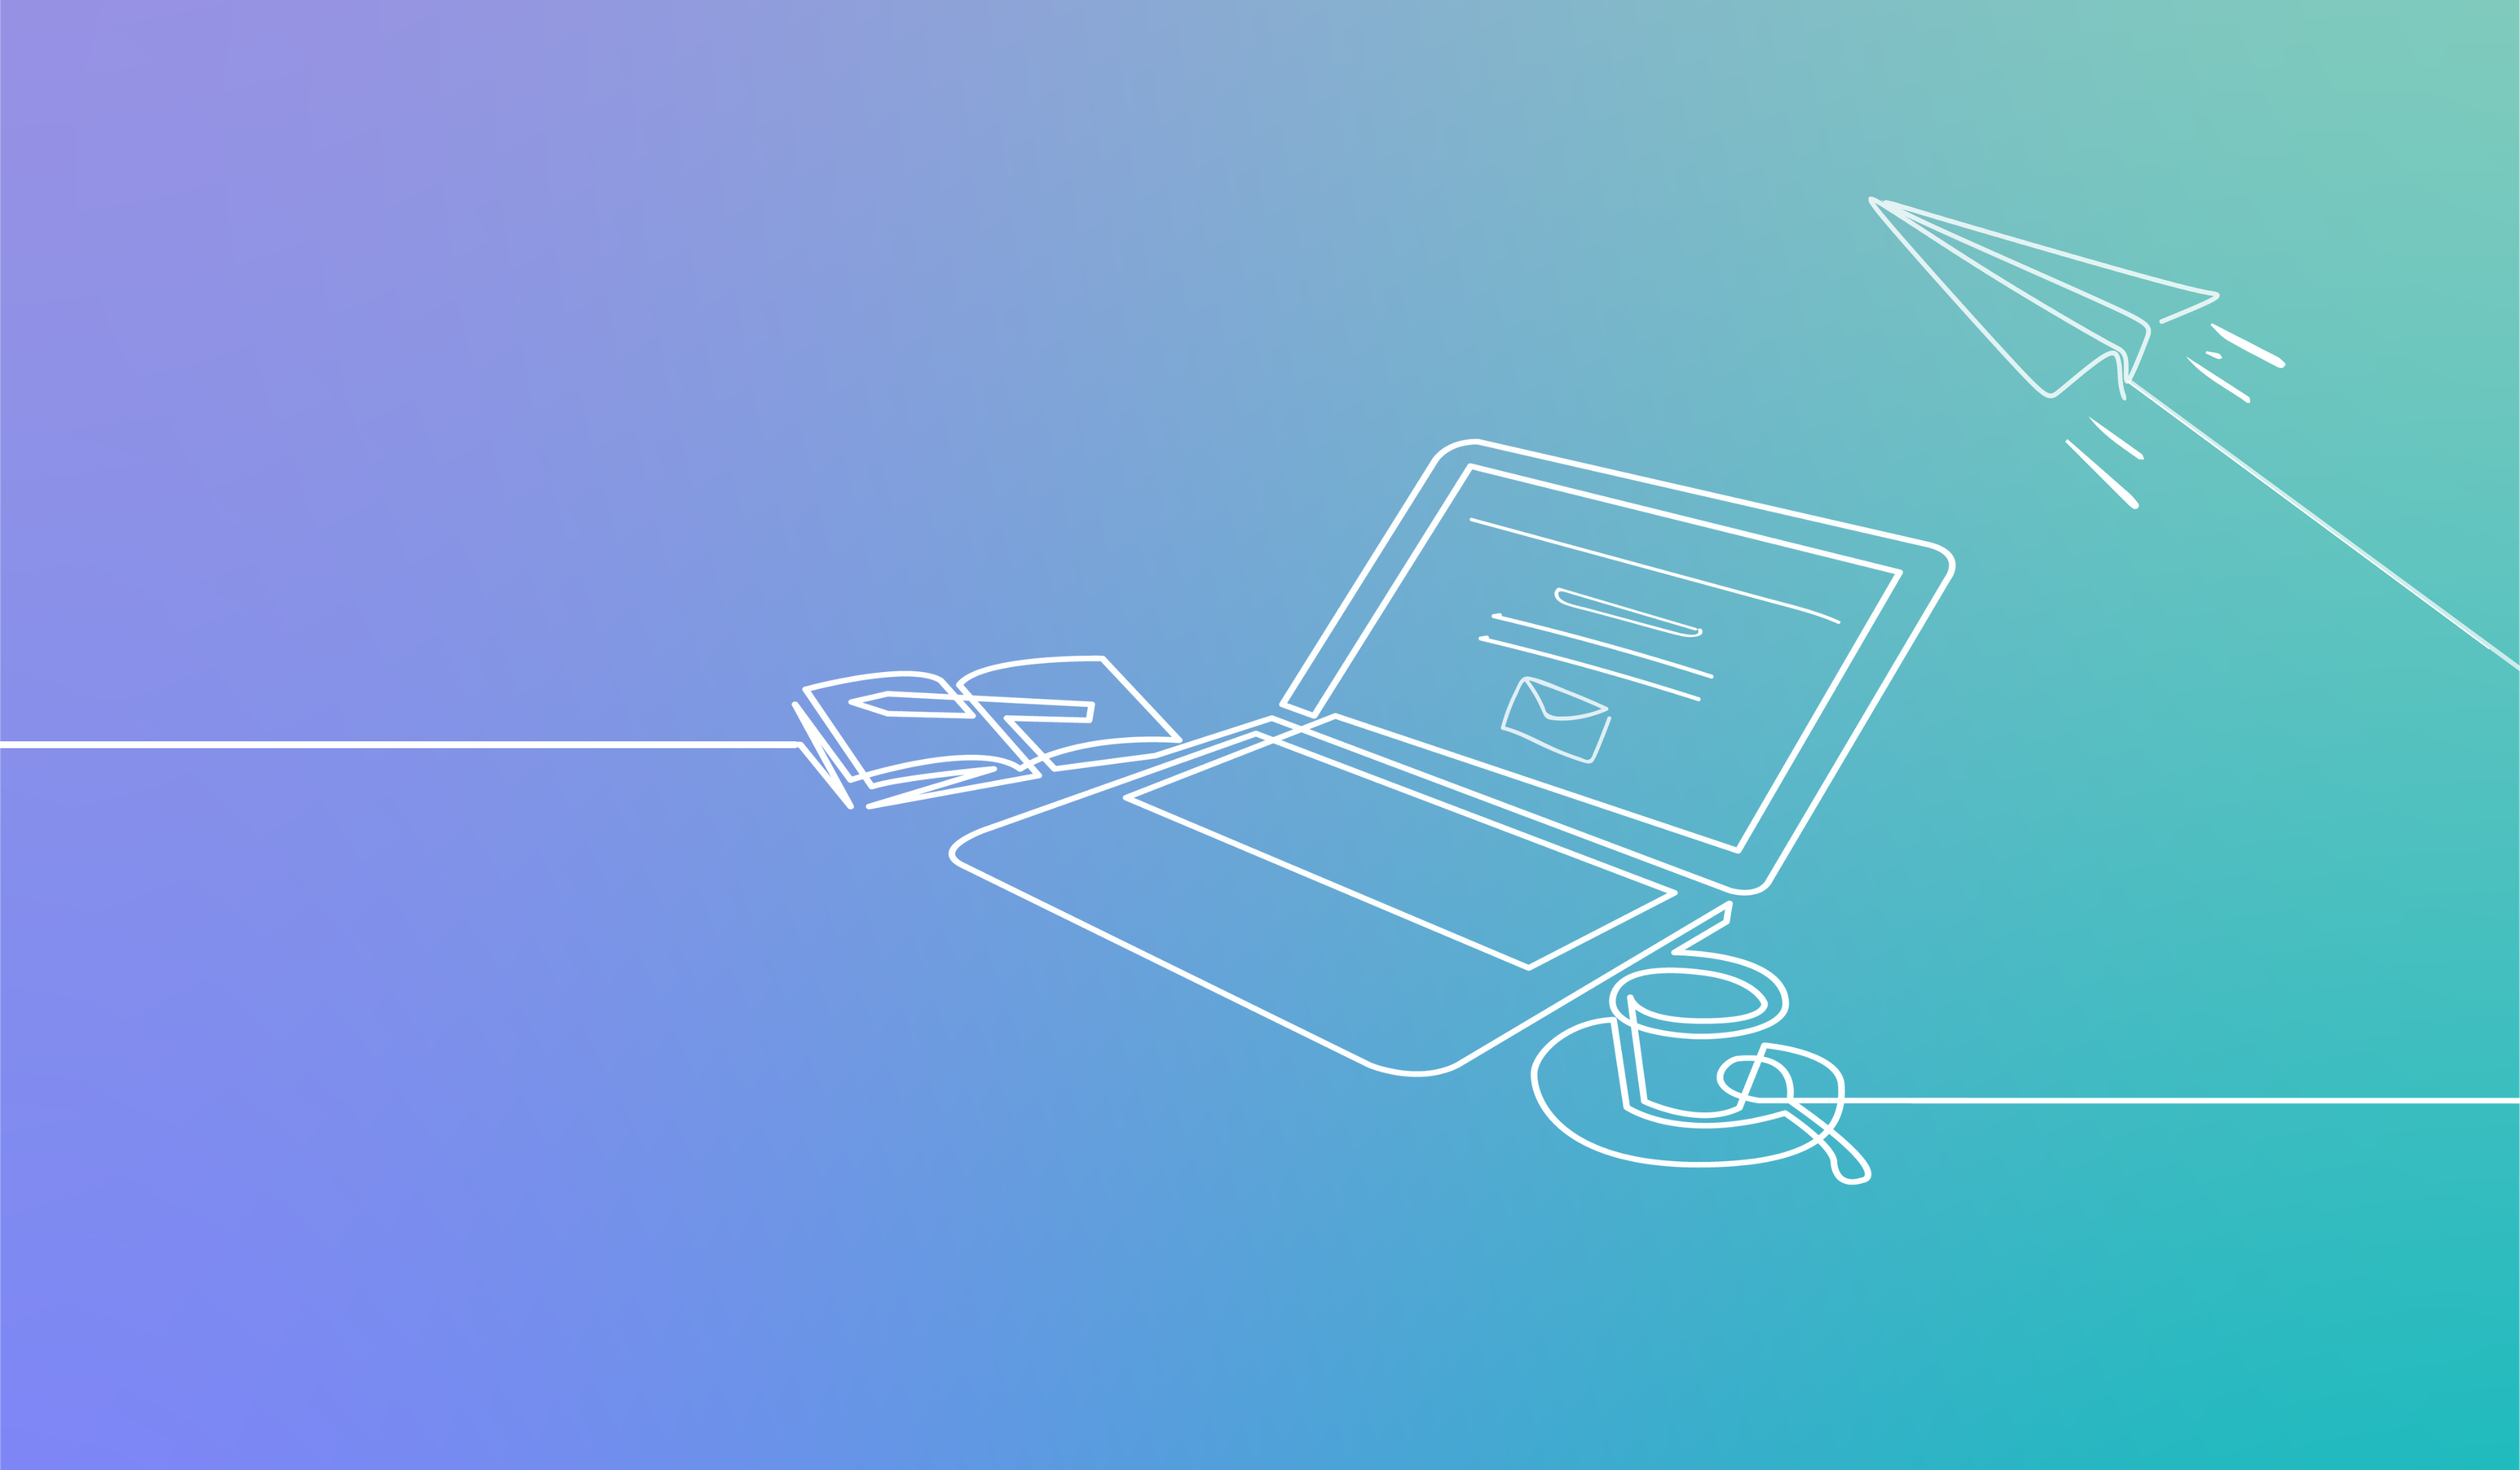 10-Step Guide for Successful Email Marketing. Image contents: Purple and blue gradient background. White line drawing of a laptop, a notebook and pen, a cup of coffee, and a paper airplane.